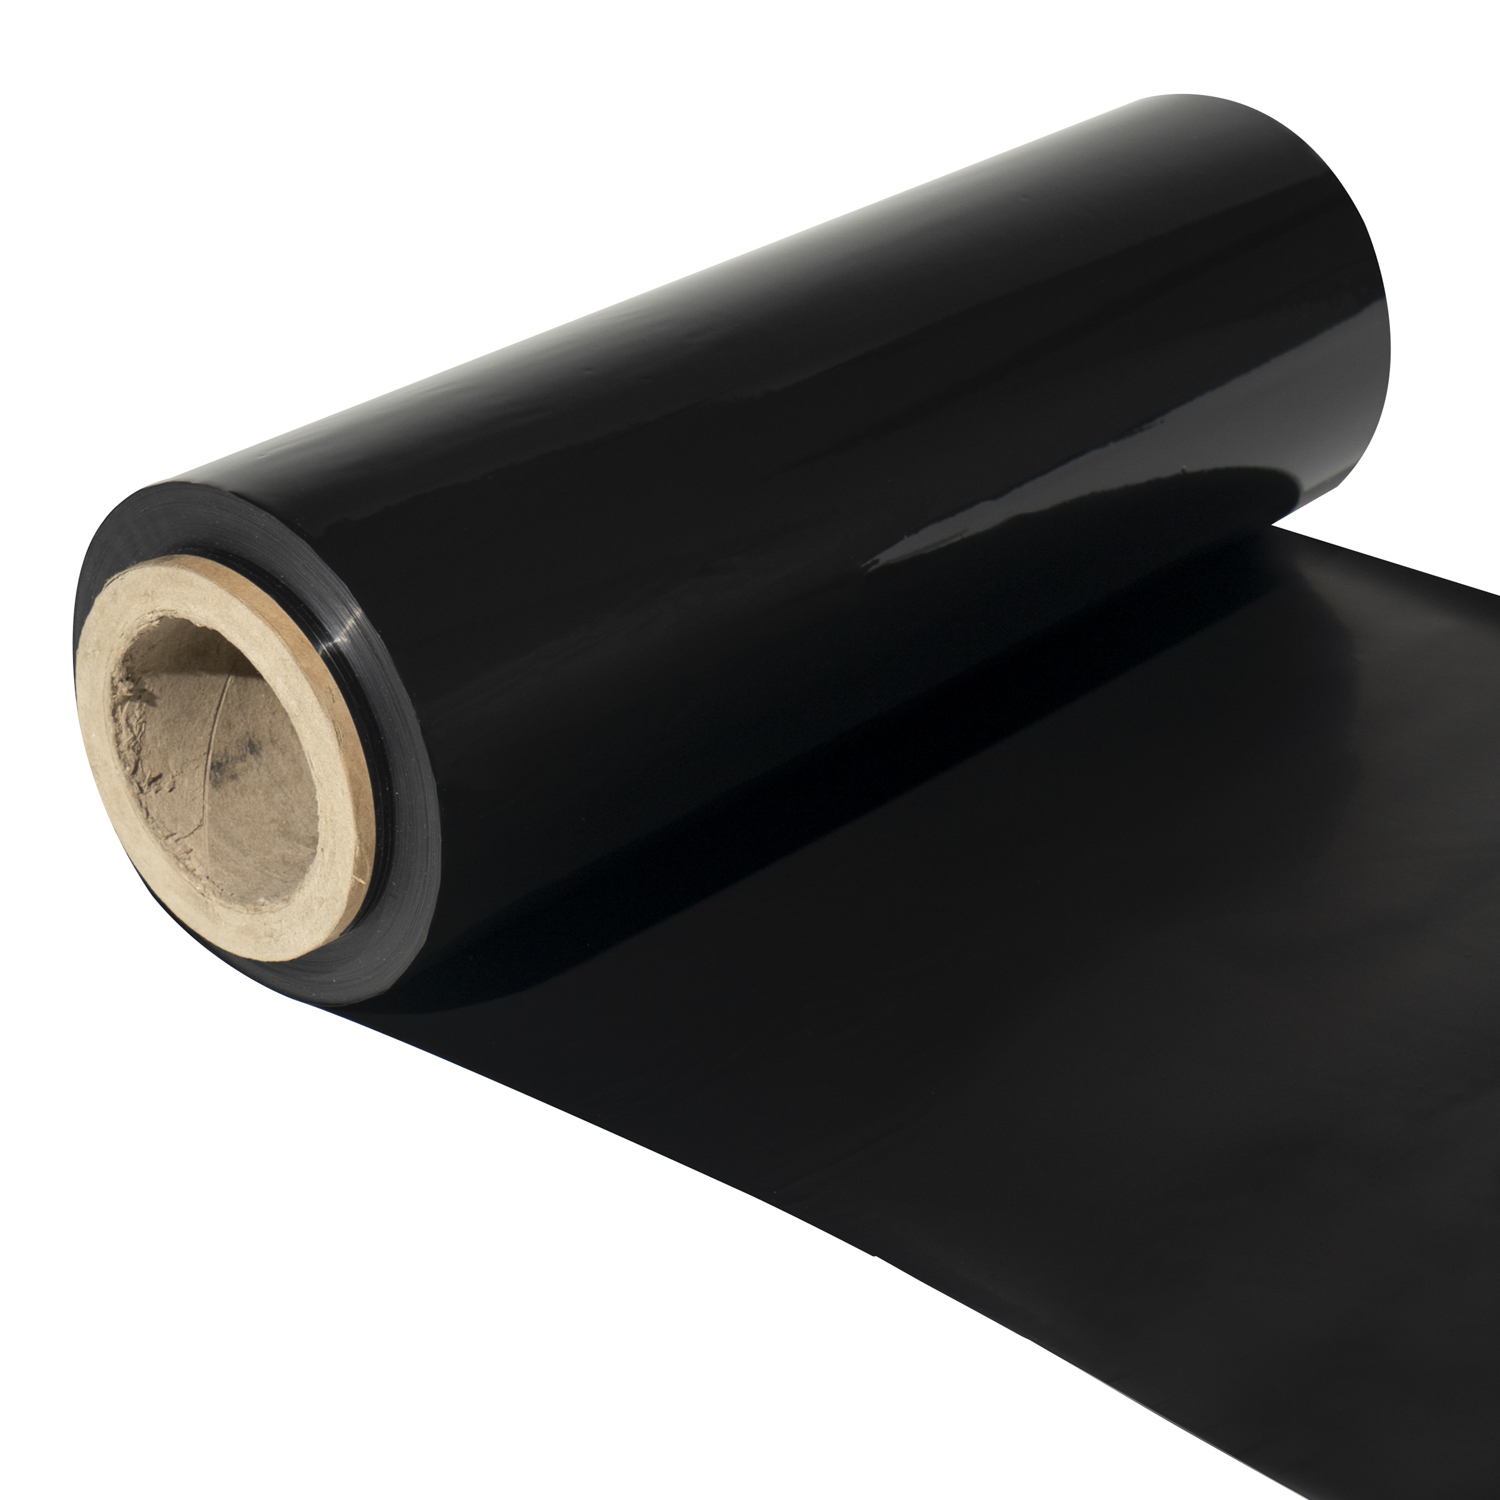 Custom Size Black Conductive Anti-static Film for Packing